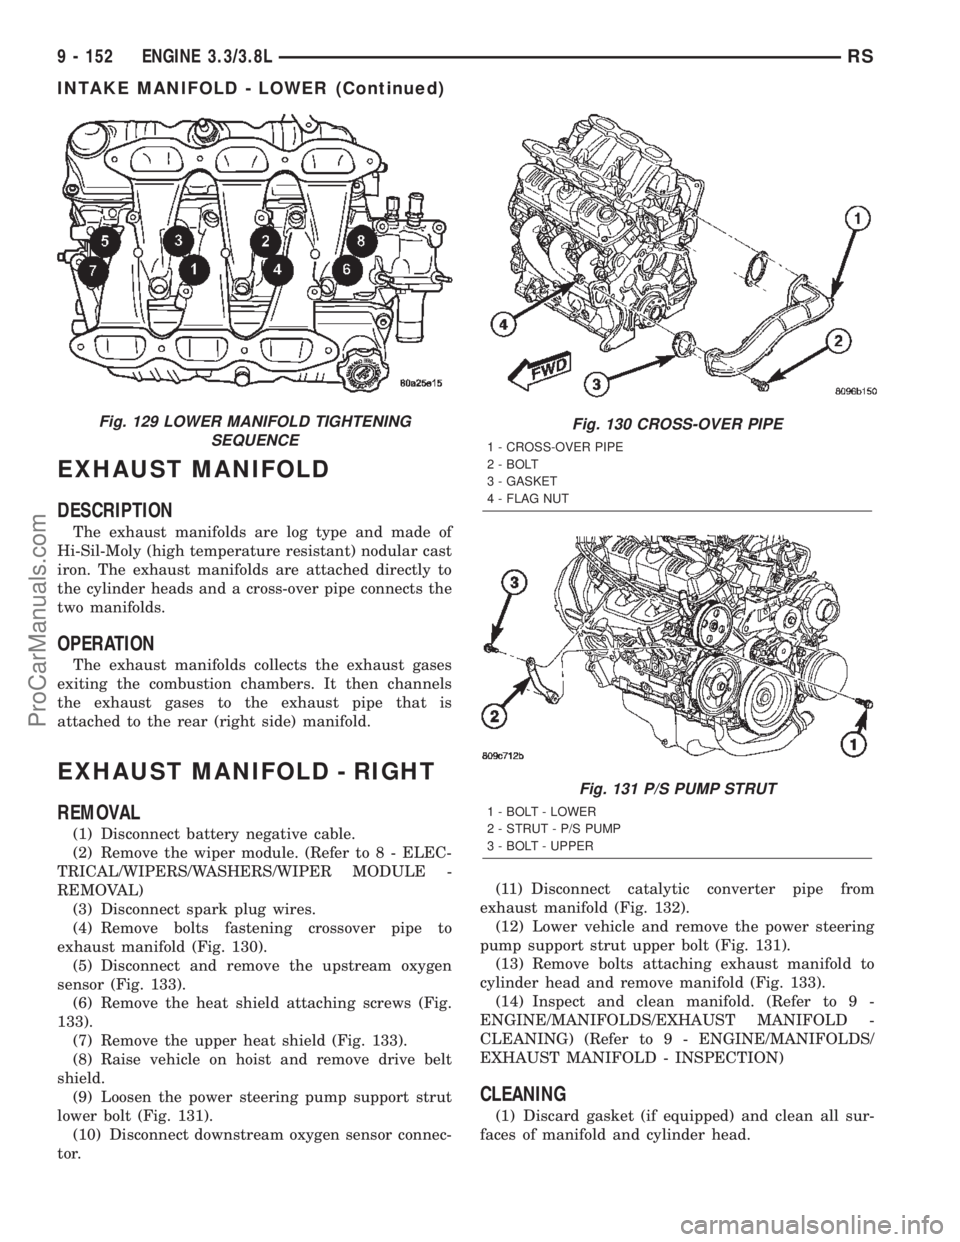 CHRYSLER VOYAGER 2002  Service Manual EXHAUST MANIFOLD
DESCRIPTION
The exhaust manifolds are log type and made of
Hi-Sil-Moly (high temperature resistant) nodular cast
iron. The exhaust manifolds are attached directly to
the cylinder head